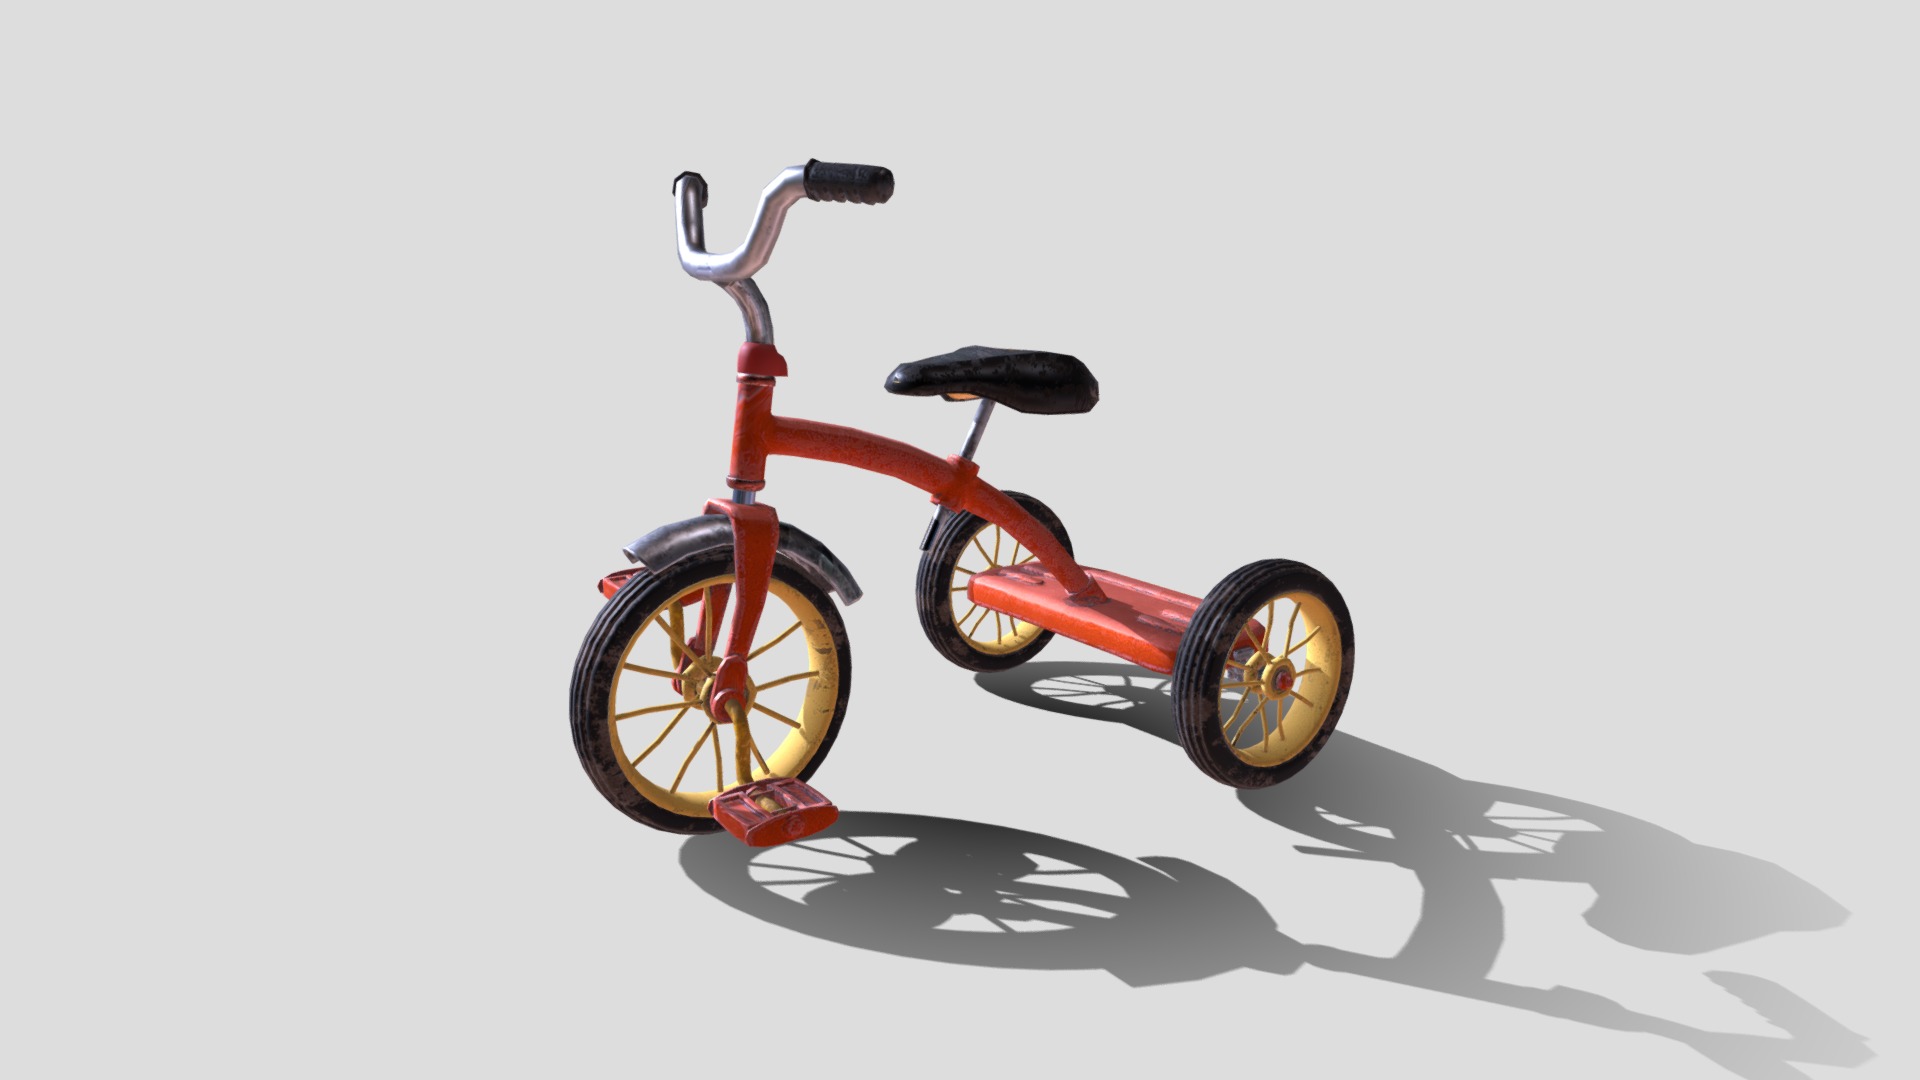 3D model Old Tricycle PBR - This is a 3D model of the Old Tricycle PBR. The 3D model is about a red and black bicycle.